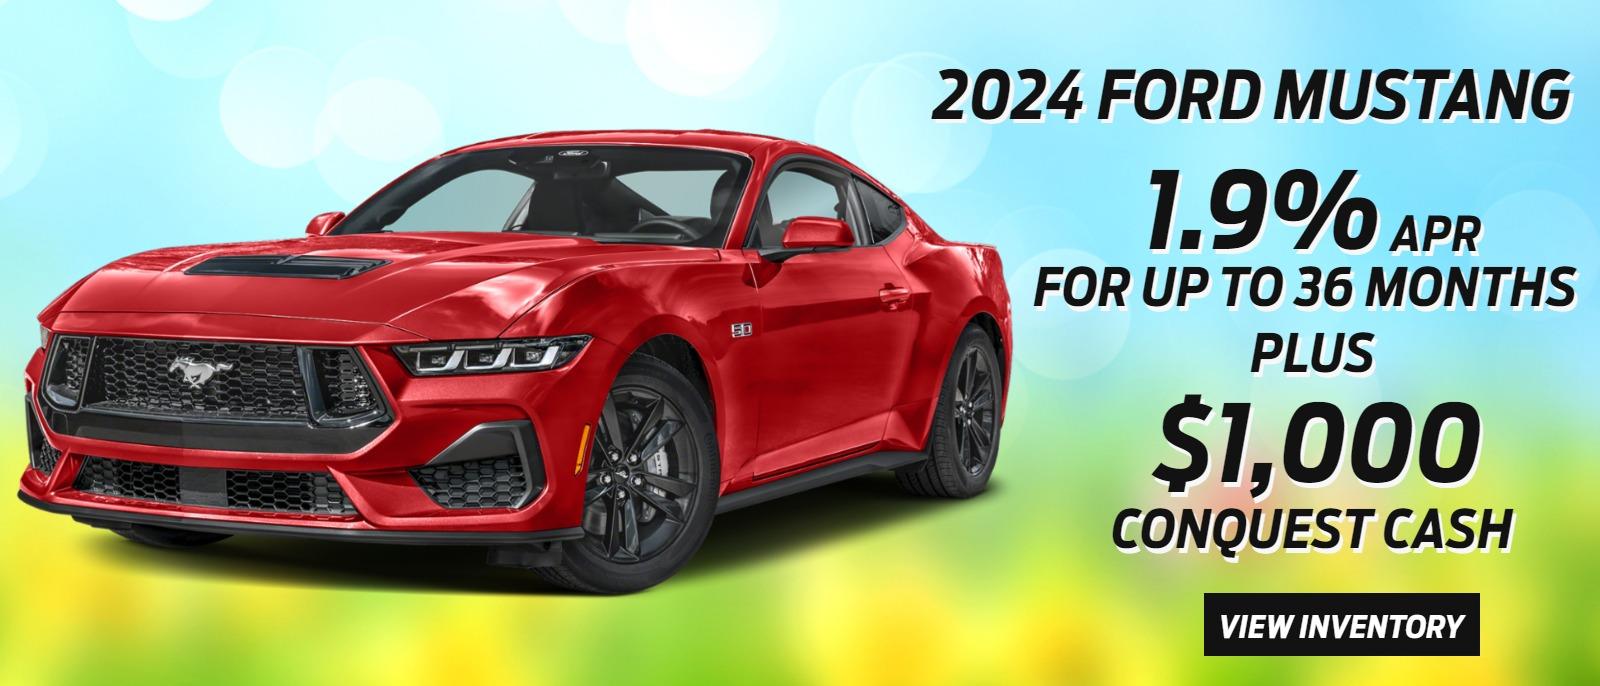 2024 Ford Mustang: 1.9% APR for 36 Months plus $1,000 Conquest Cash!